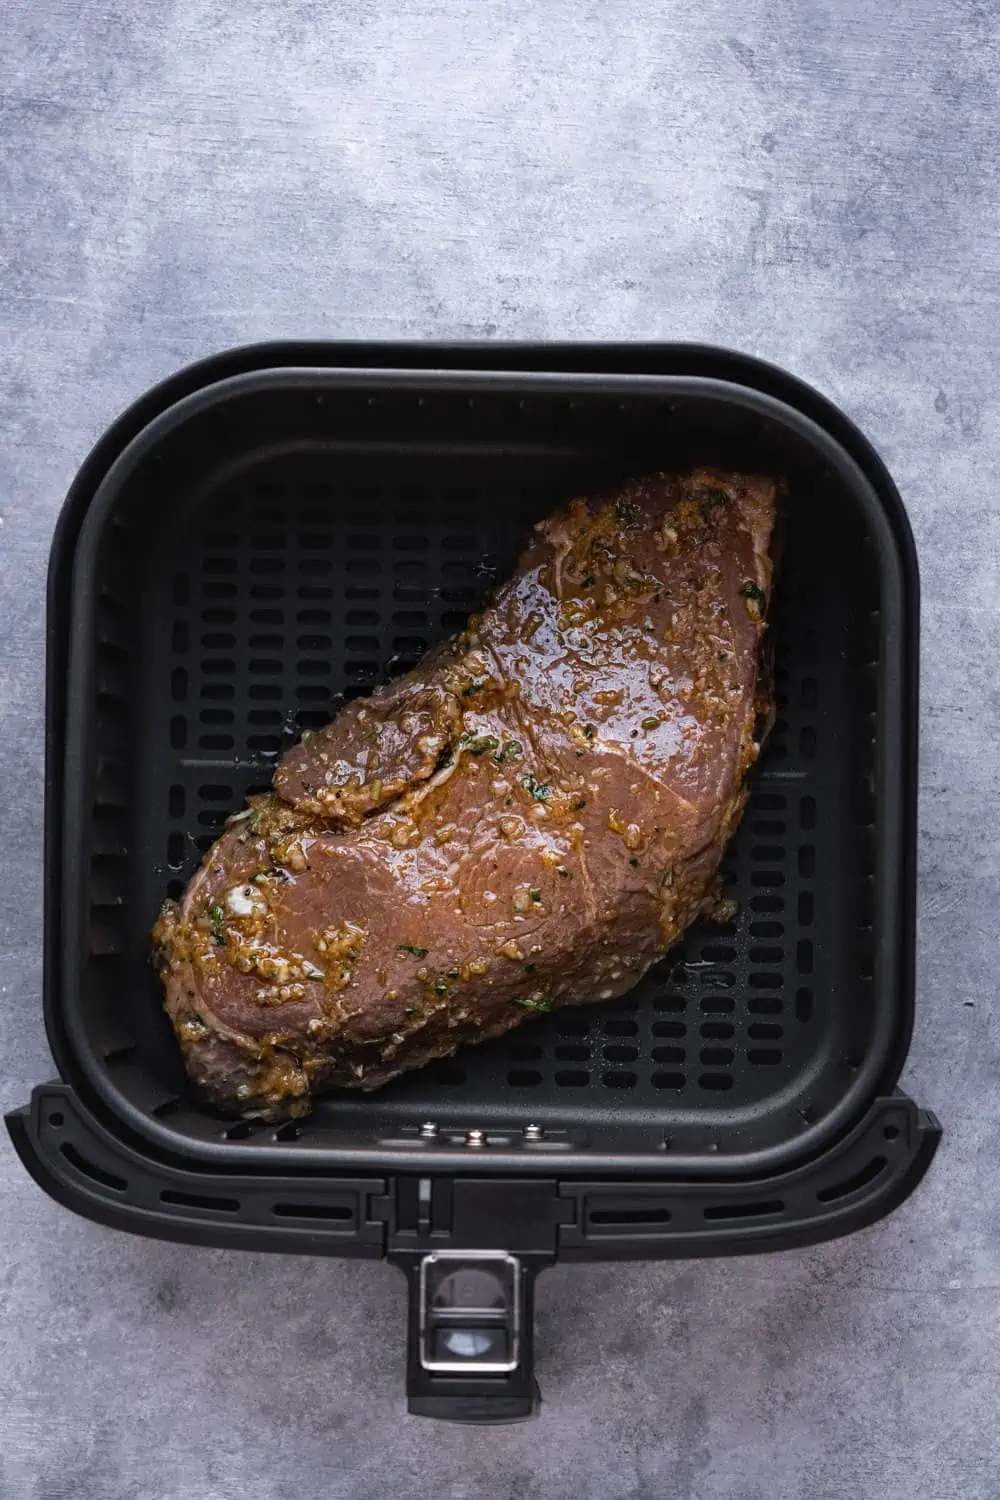 Uncooked marinated steak in the air fryer.